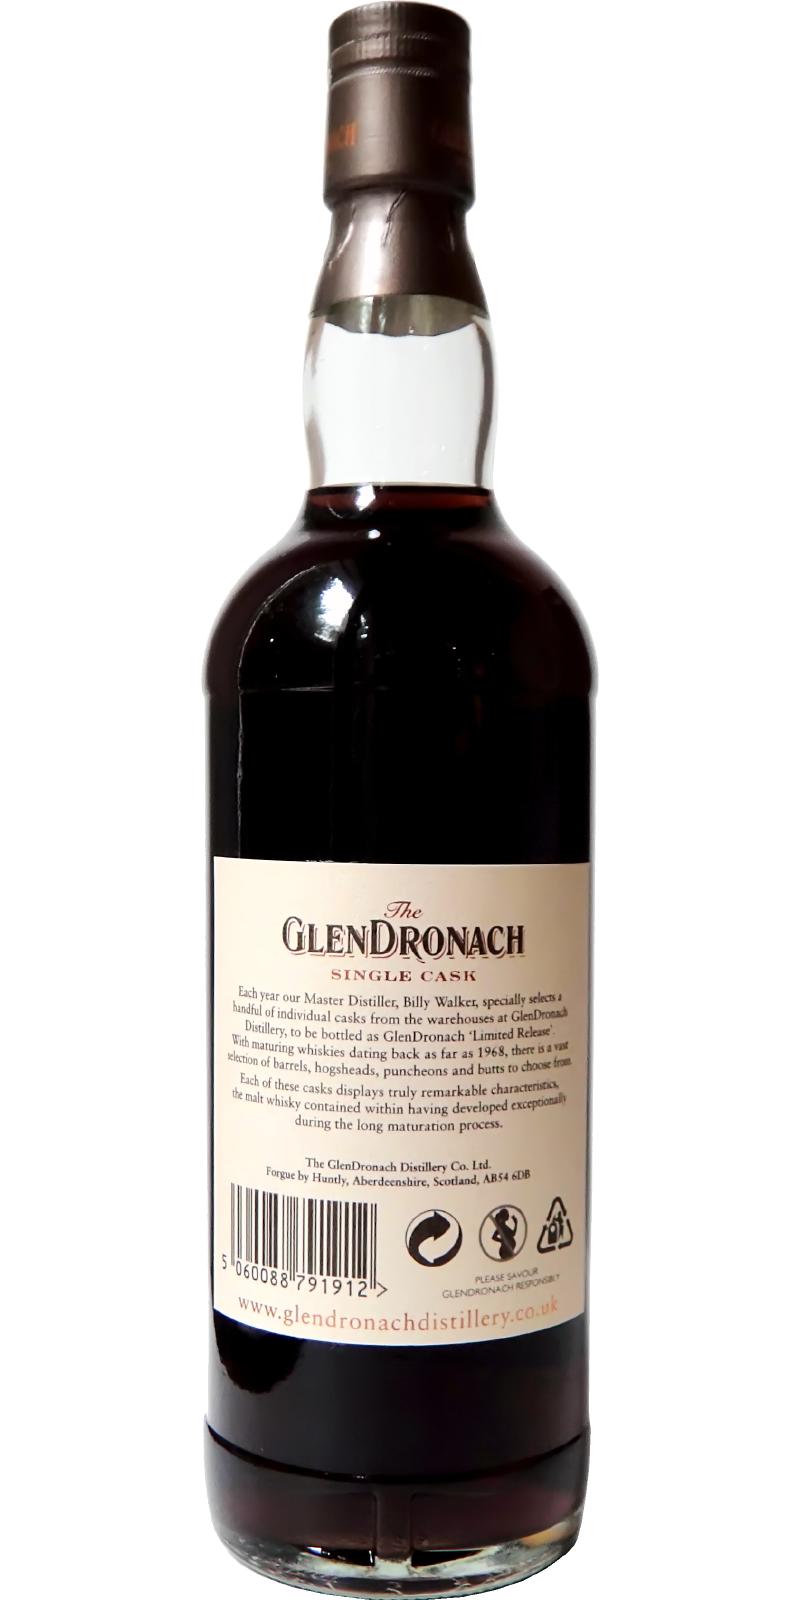 Glendronach 1972 - Ratings and reviews - Whiskybase